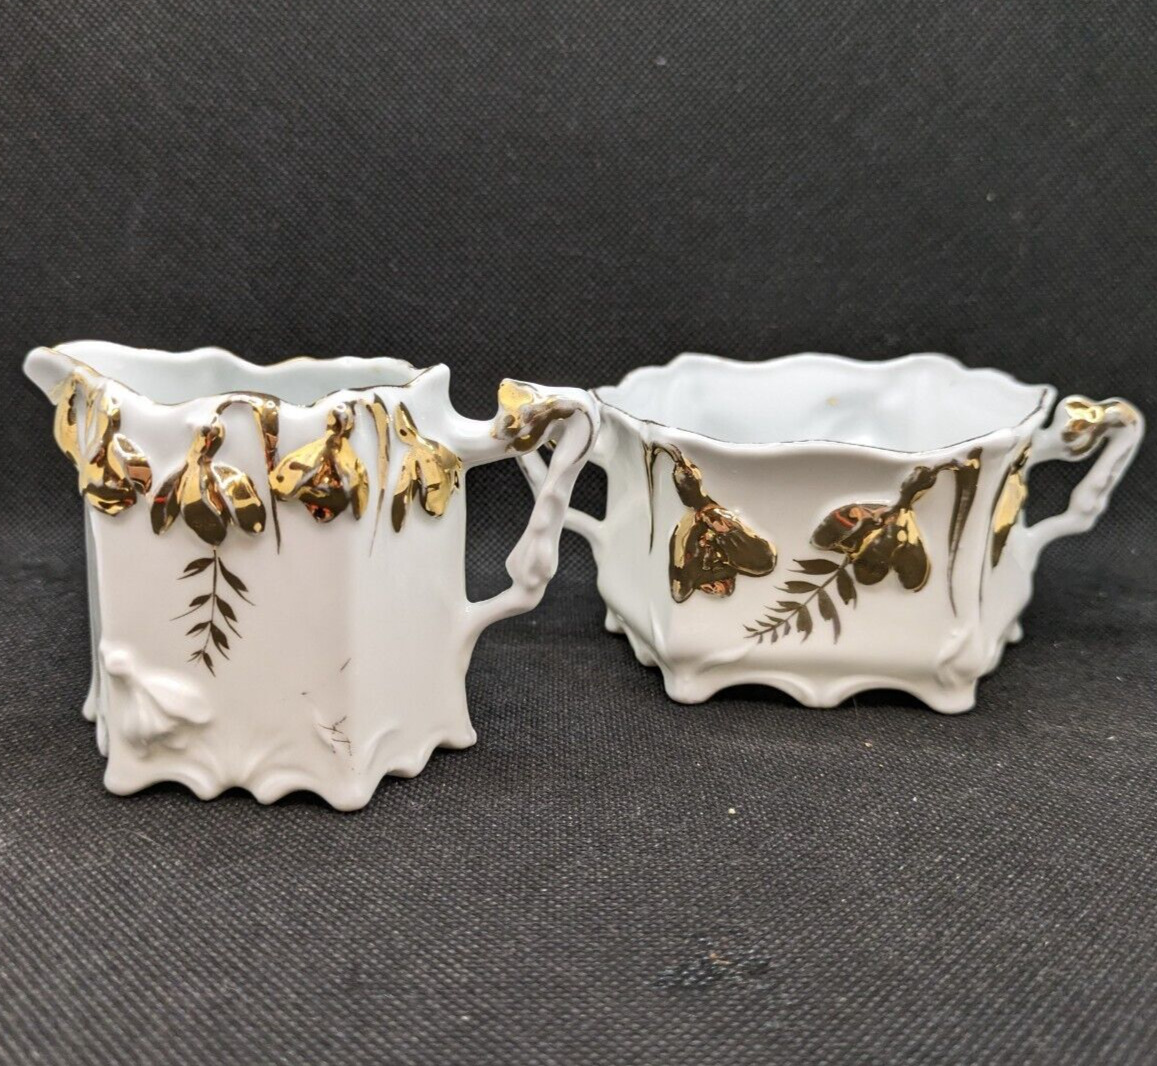 Antique RS Prussia creamer and sugar Set Snow Drop Pattern White with Gold Trim